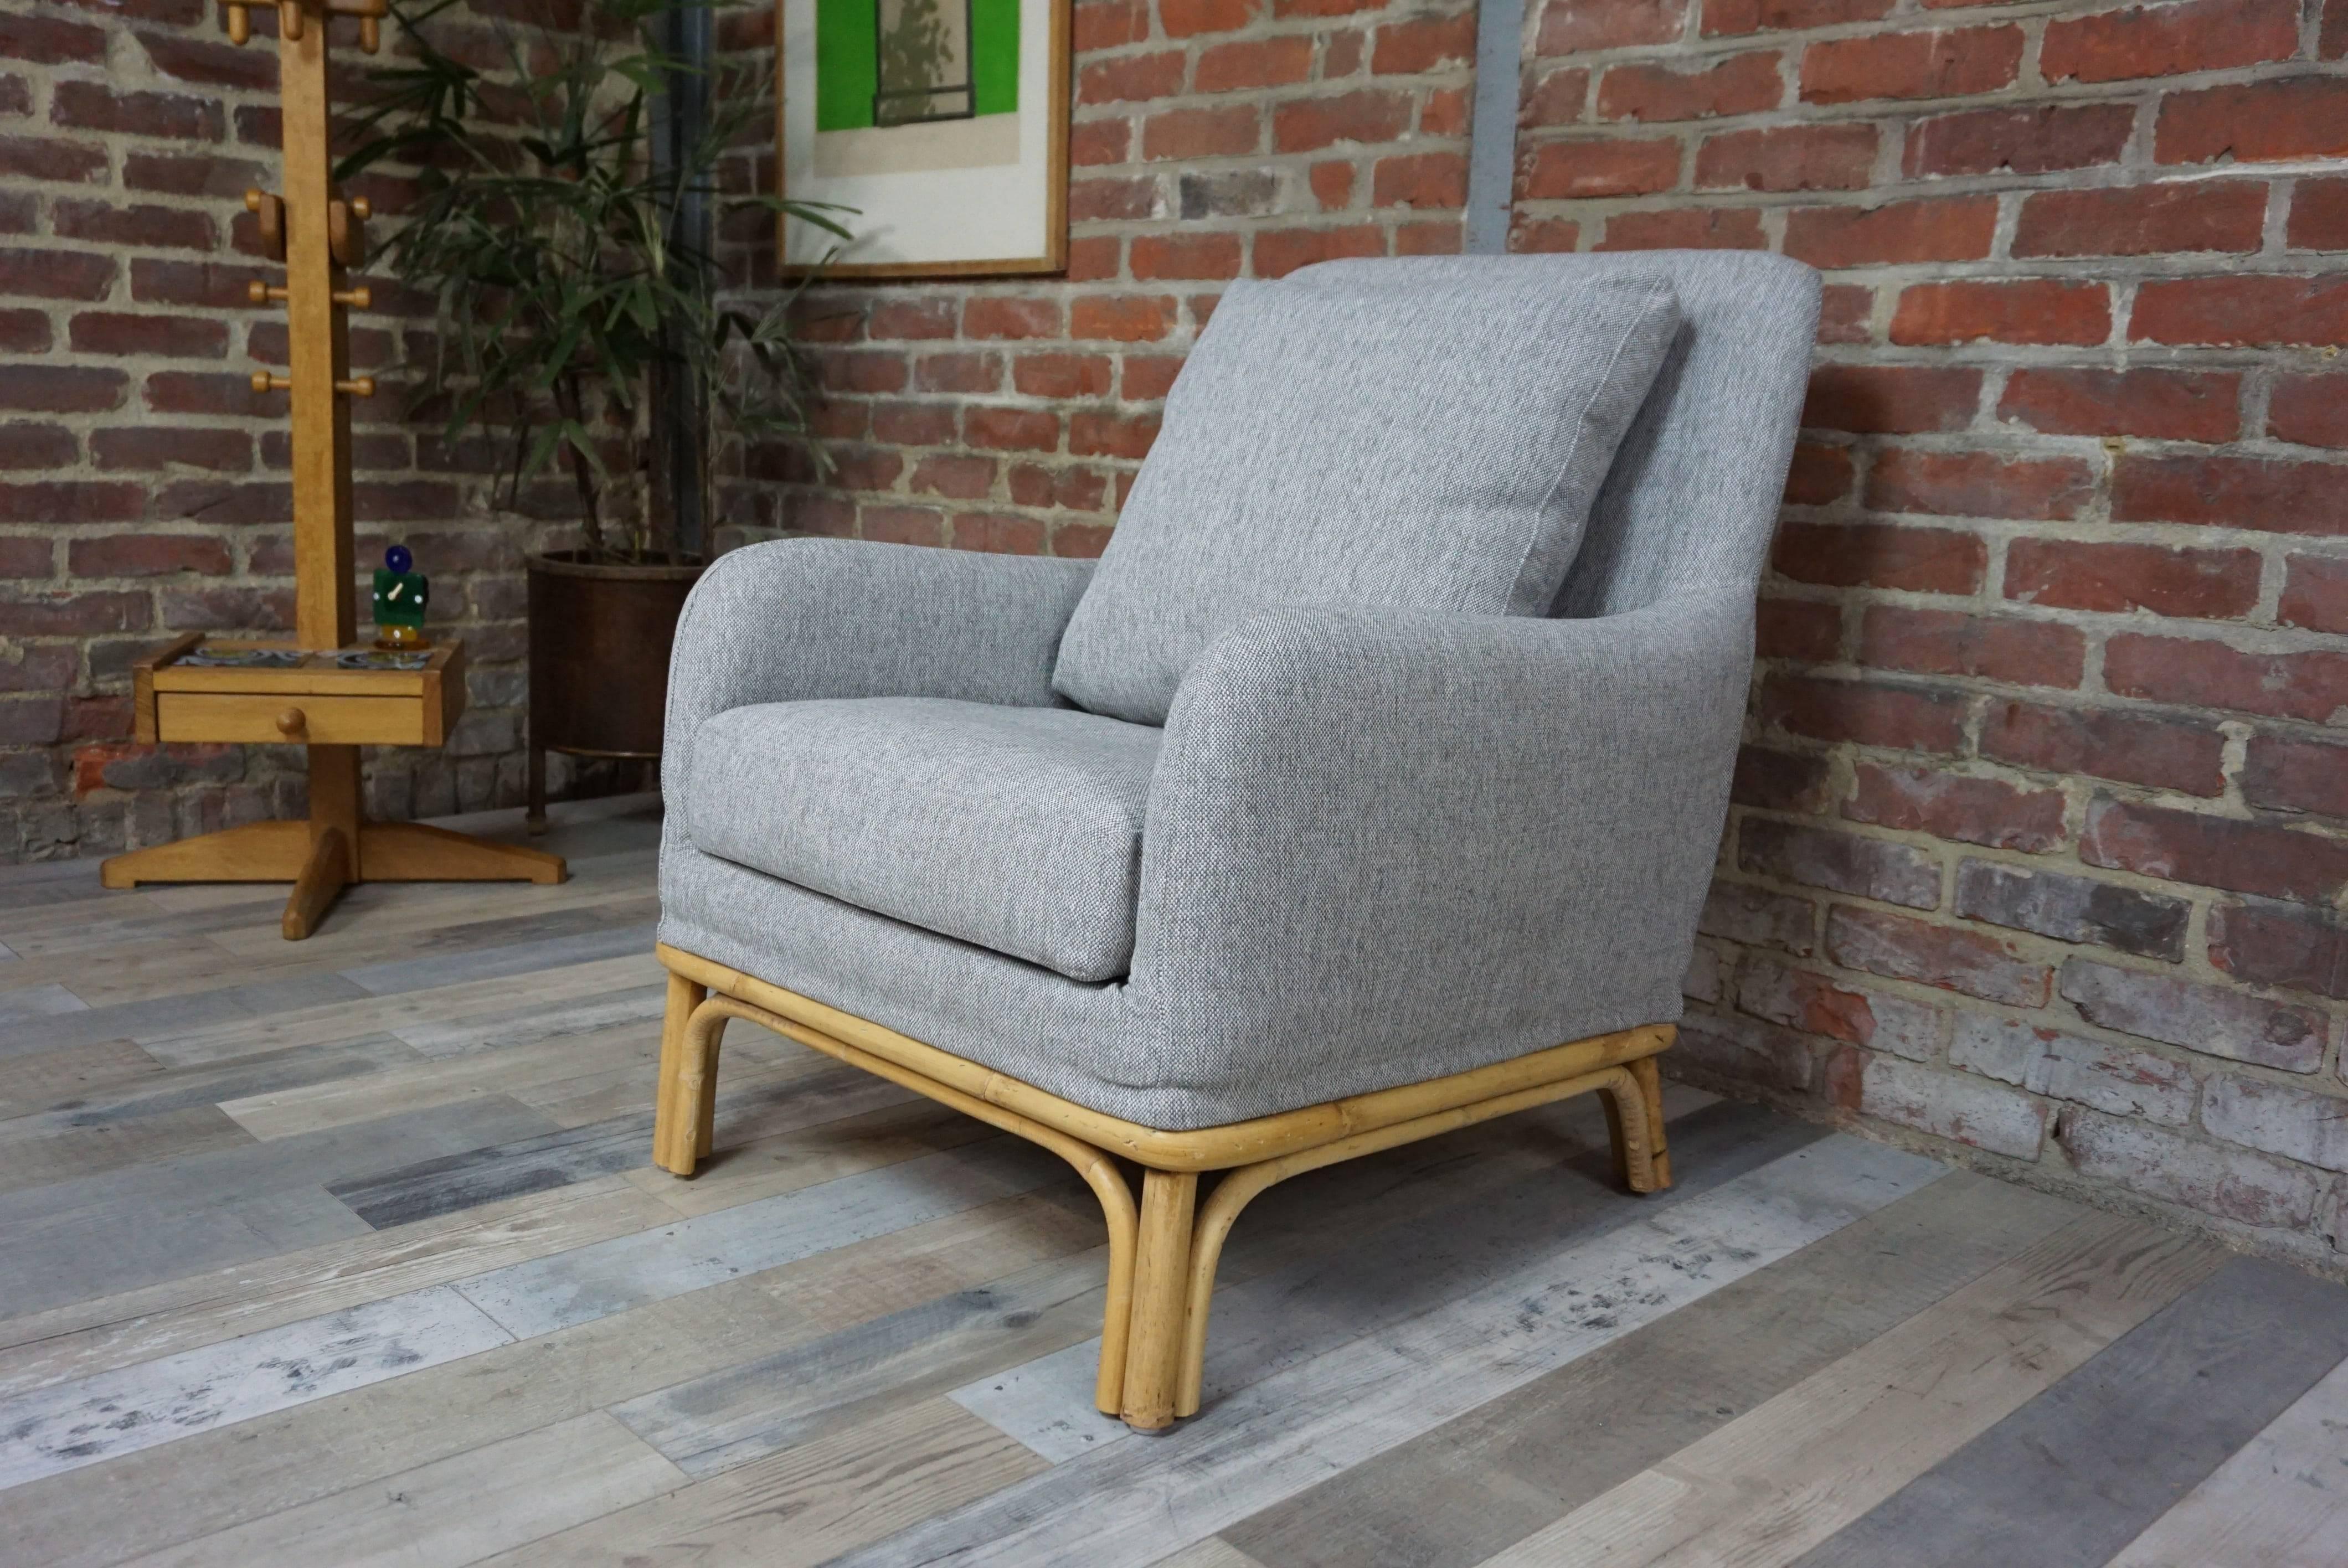 Ultra comfortable, ultra soft, with a vintage design and resolutely modern, this armchair with the soft shell dressed in gray and white fabric, with rattan feet is a real invitation Cocooning! In excellent condition.